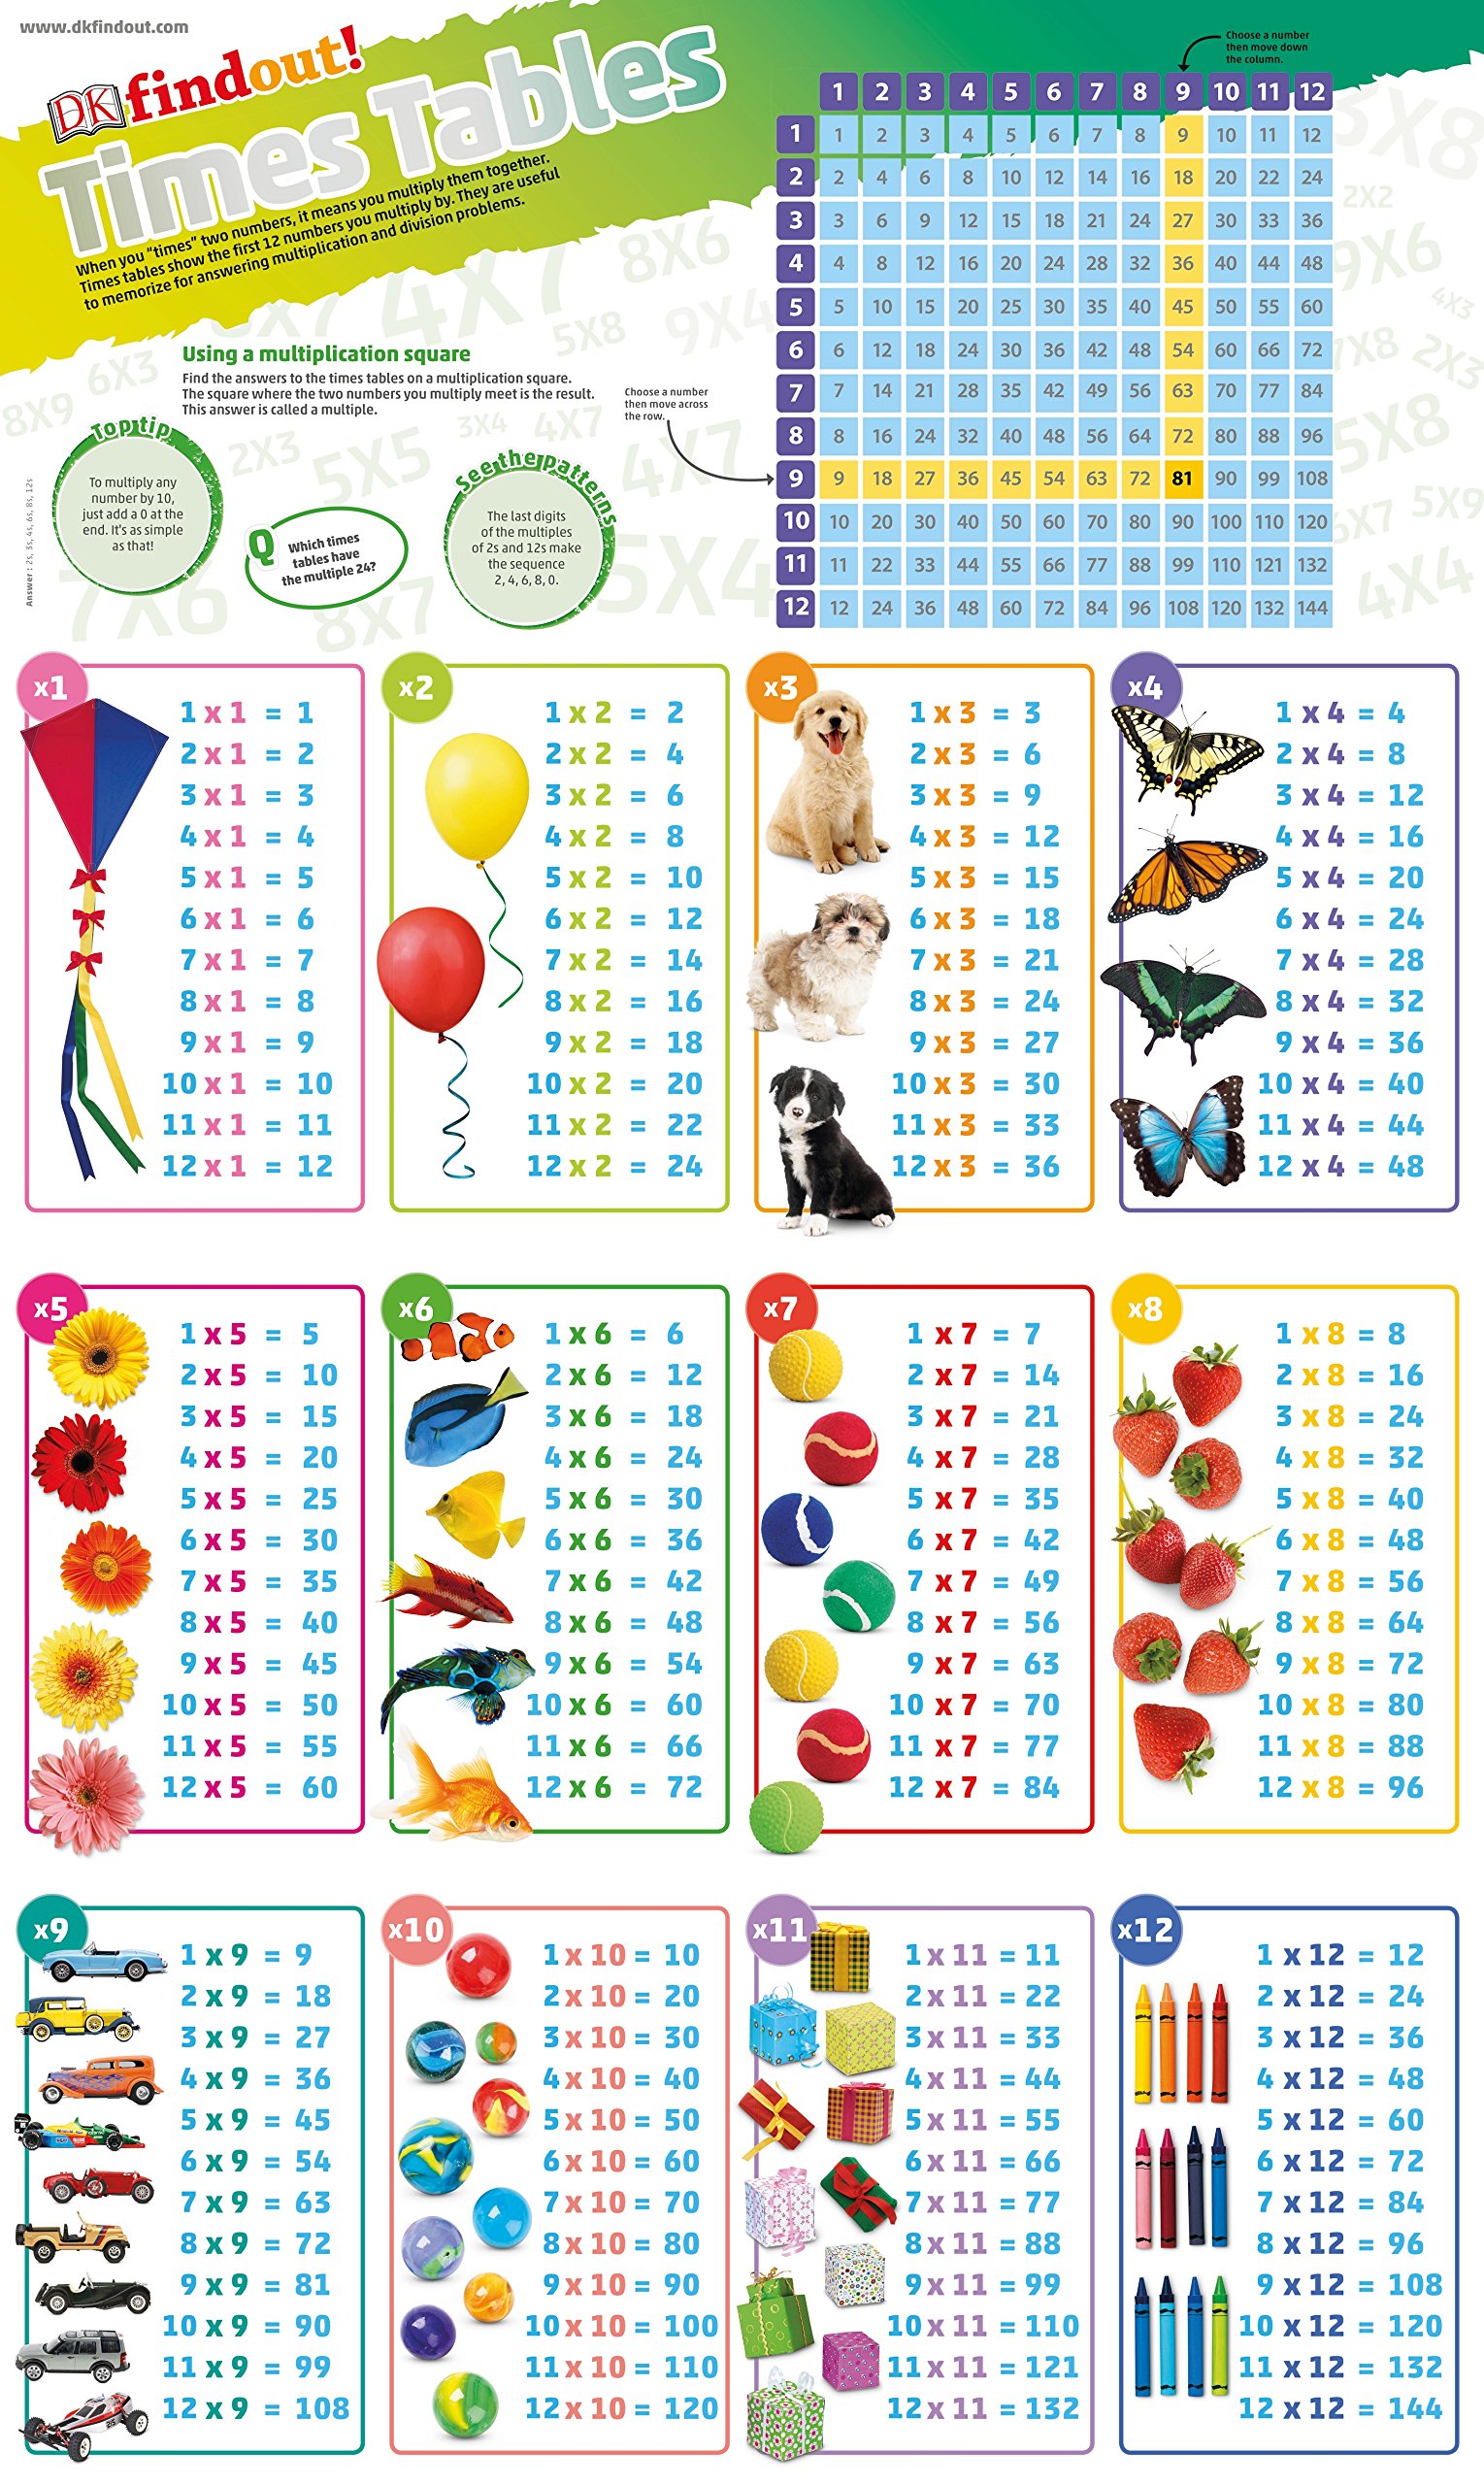 DKfindout! Times Tables Poster